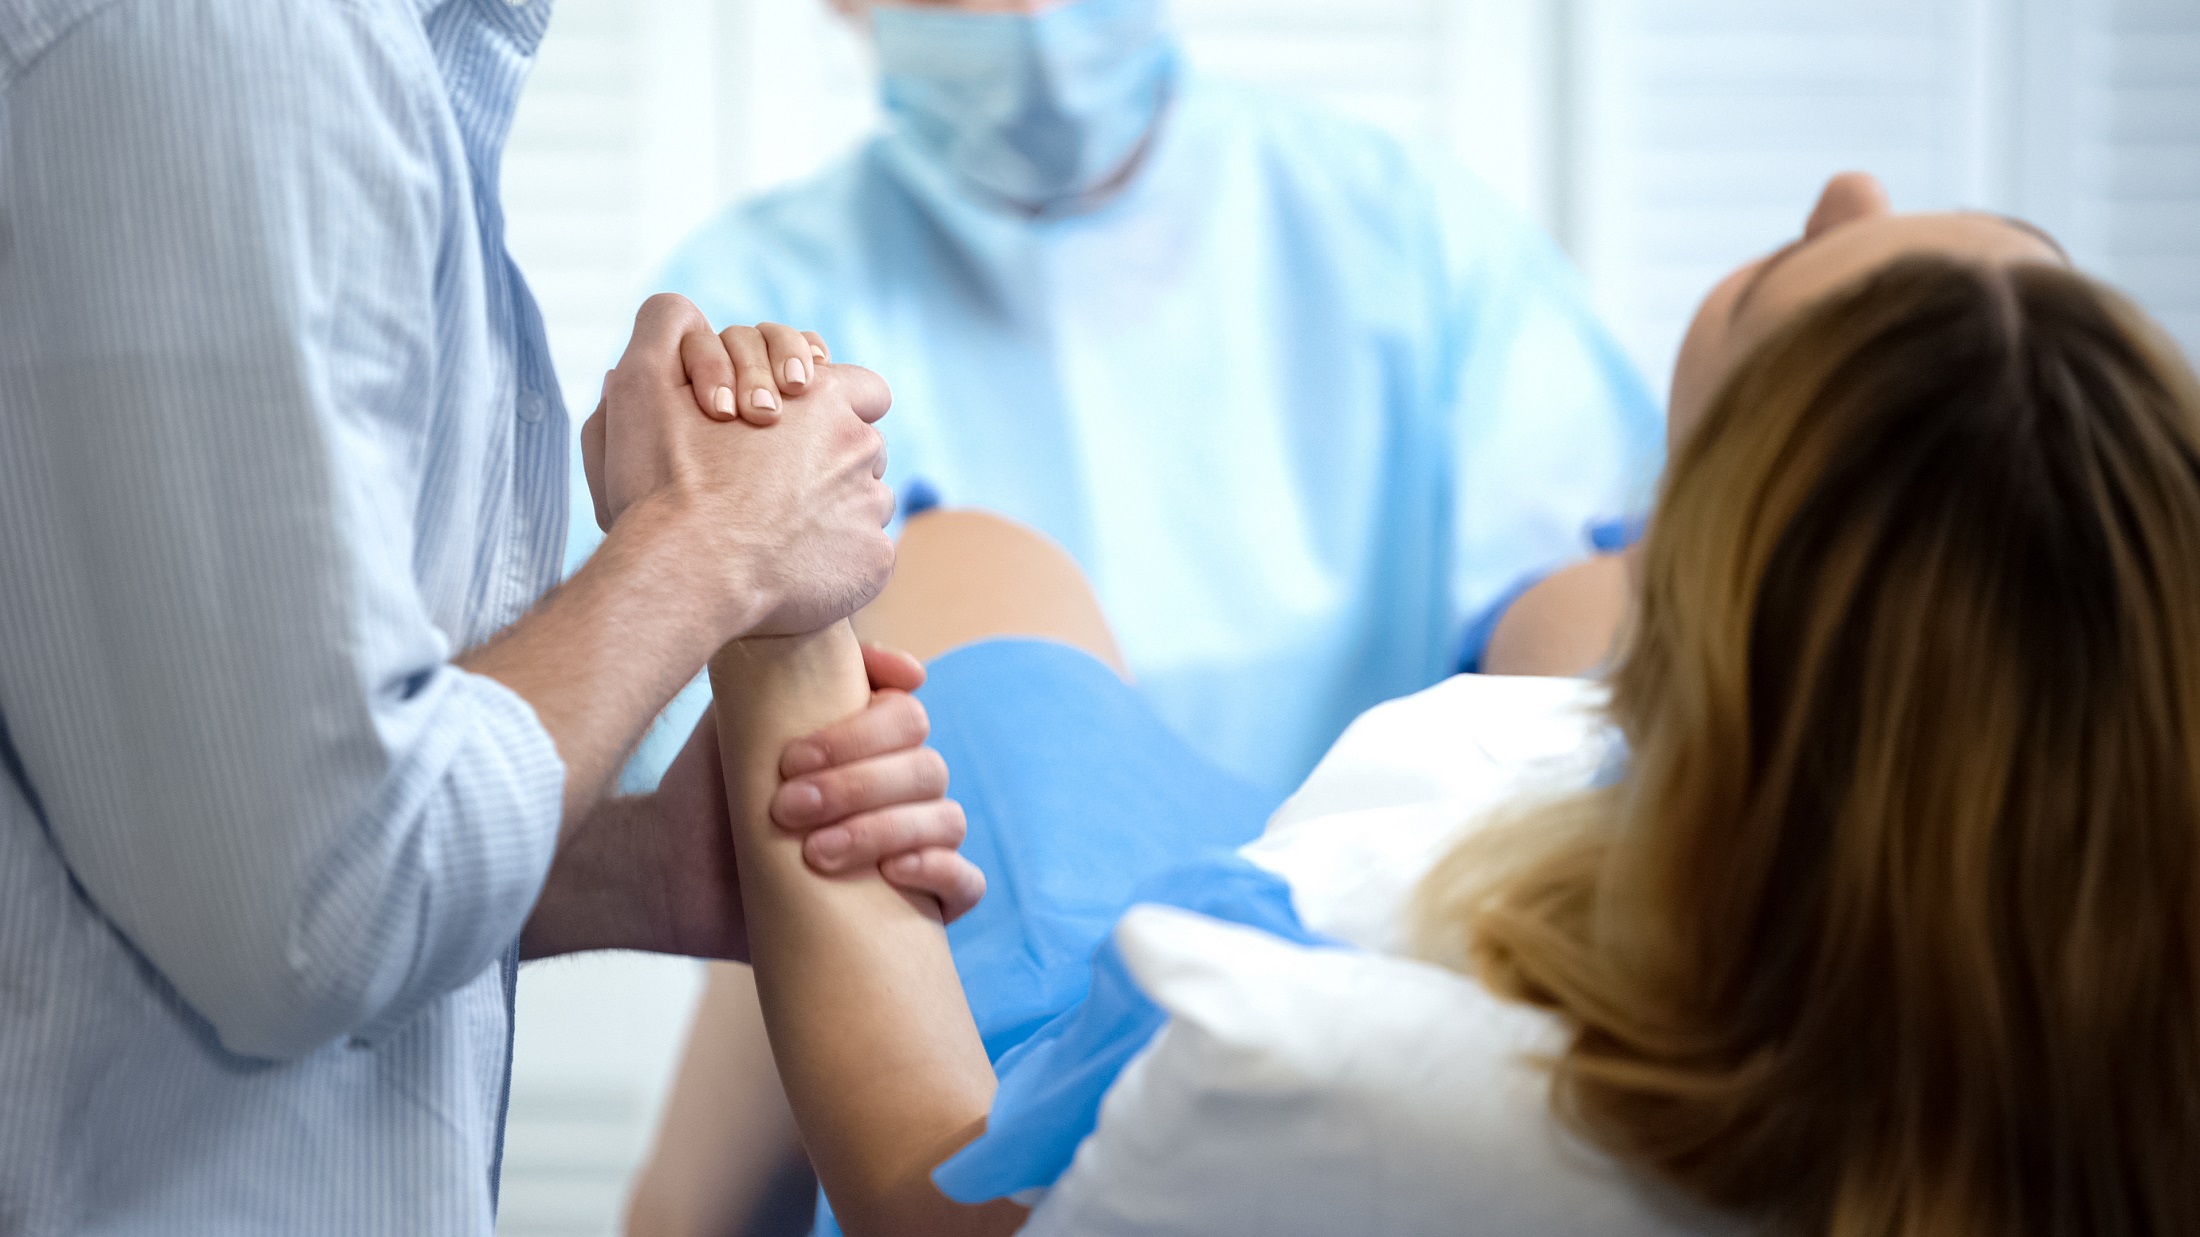 Nails for childbirth – are you allowed to get a manicure or pedicure?